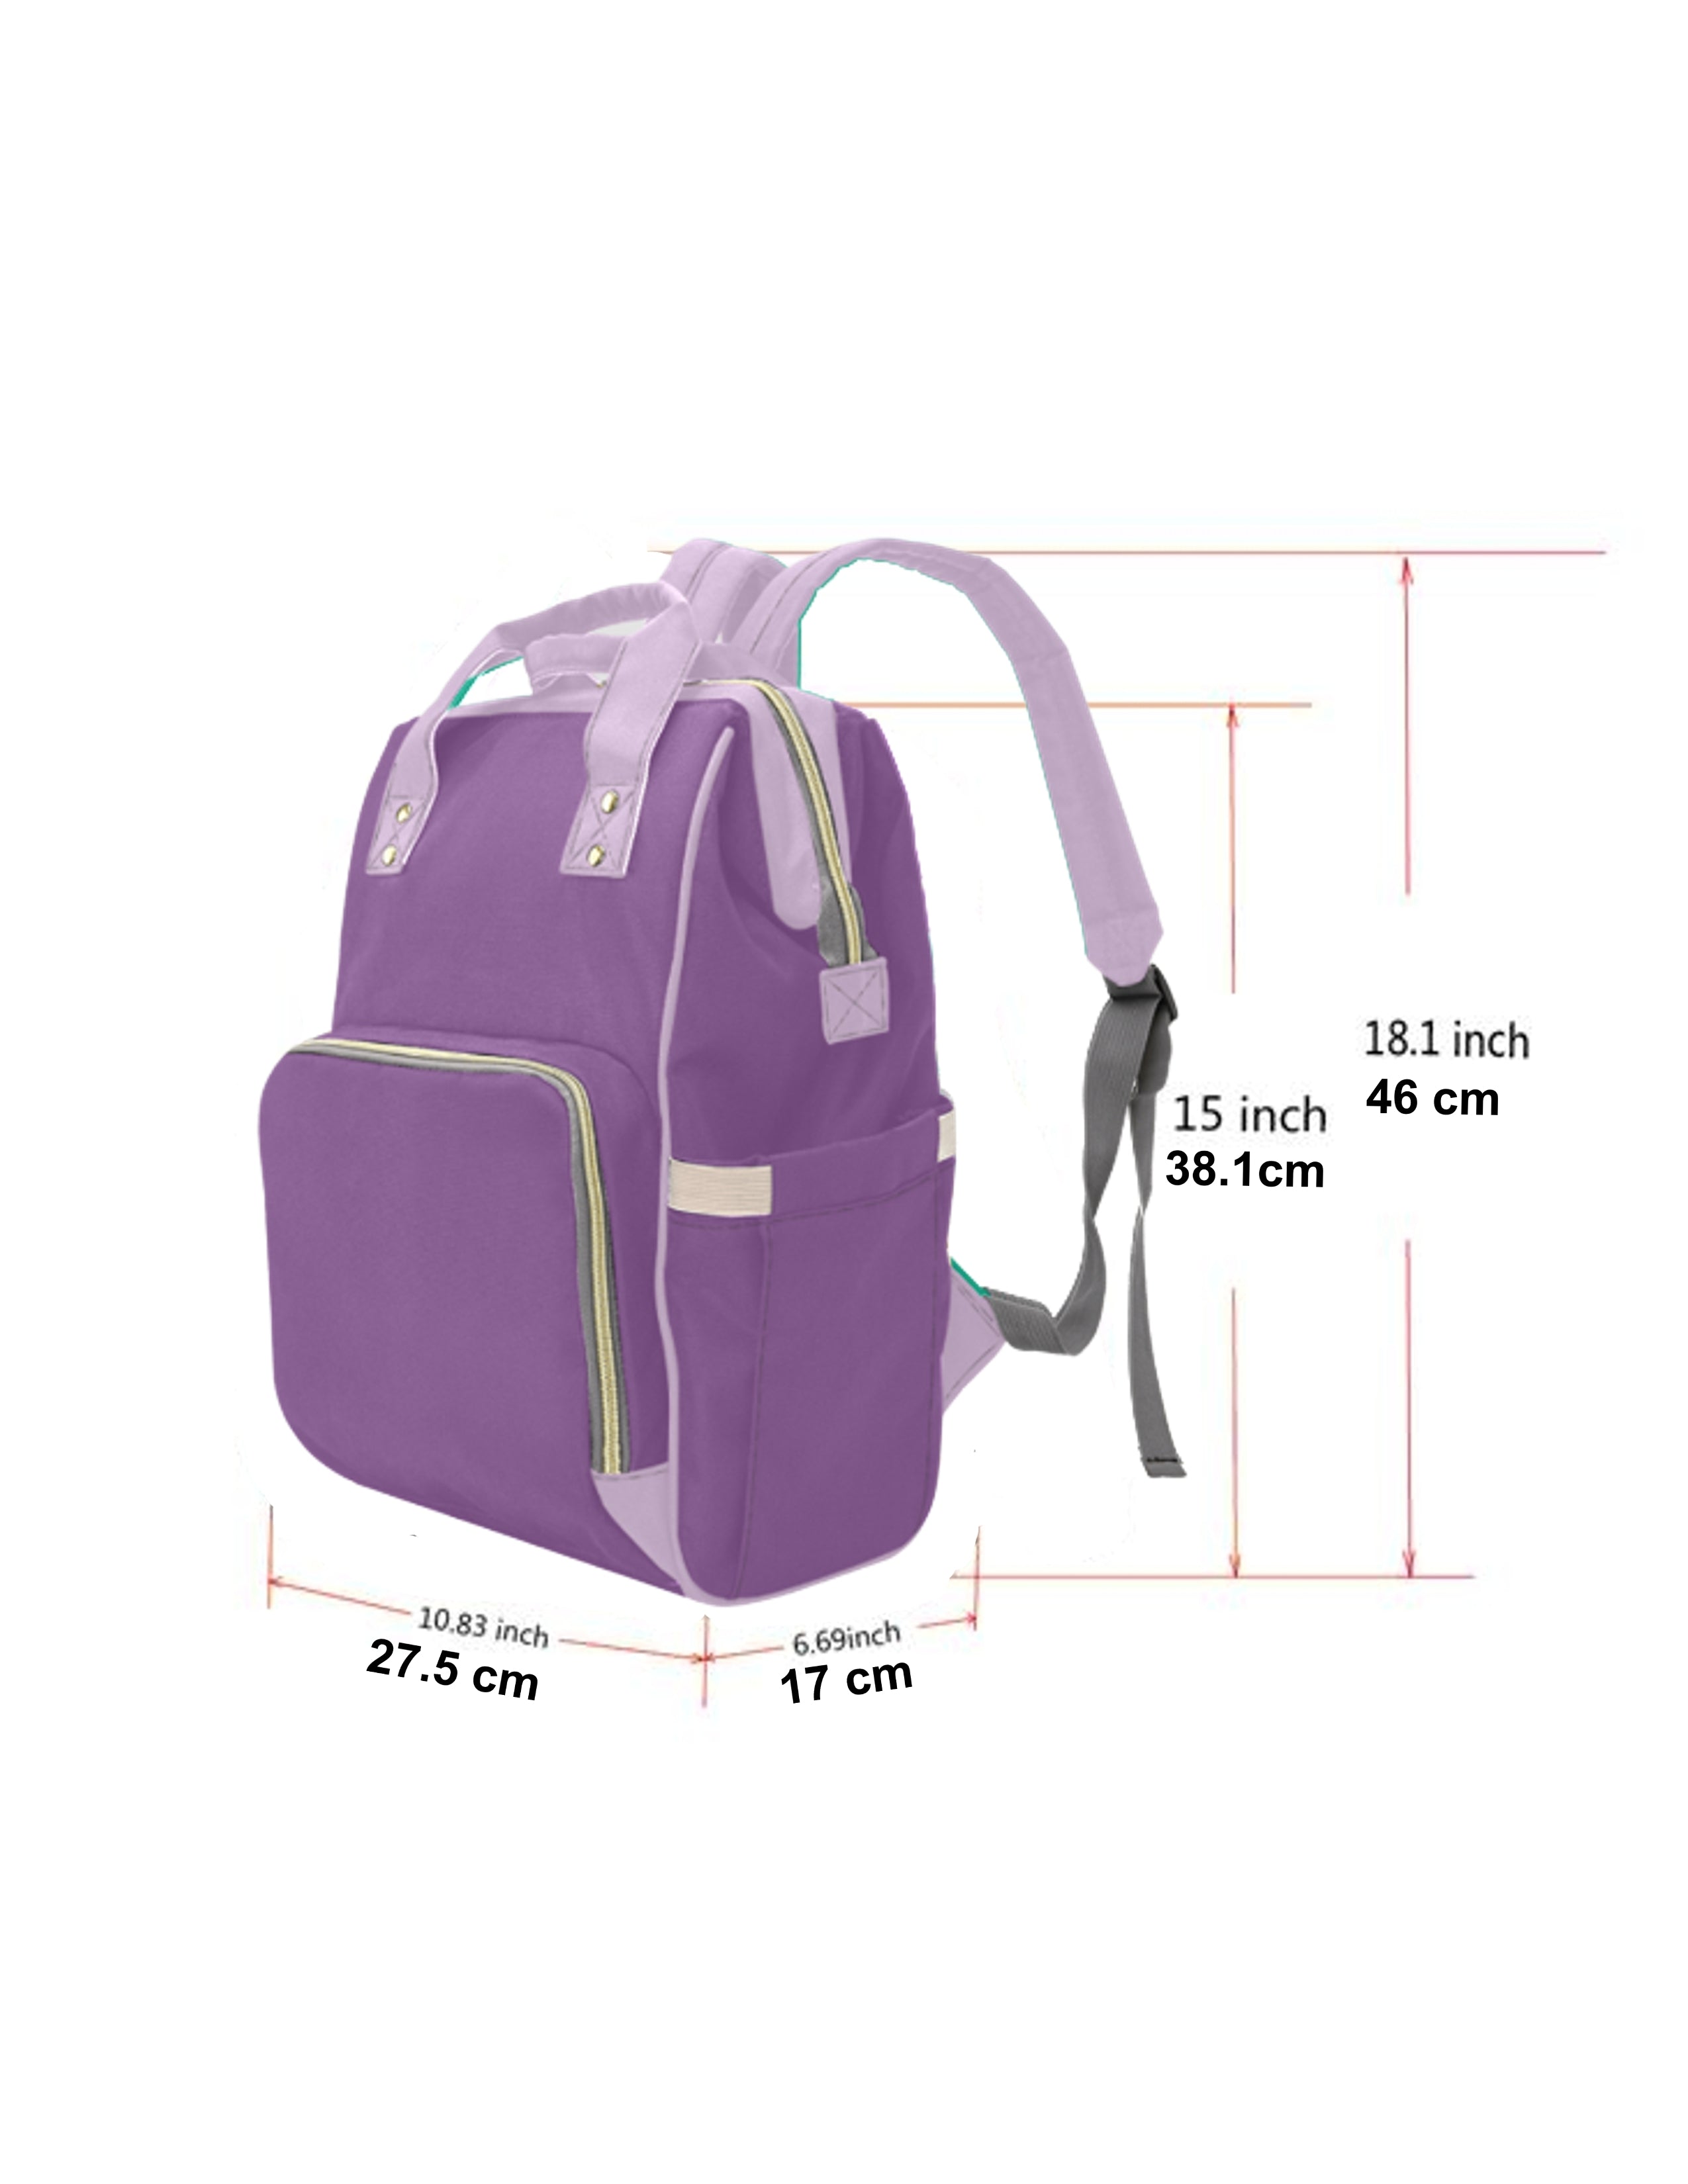 Beads - Multi-Function Backpack Nappy Bag